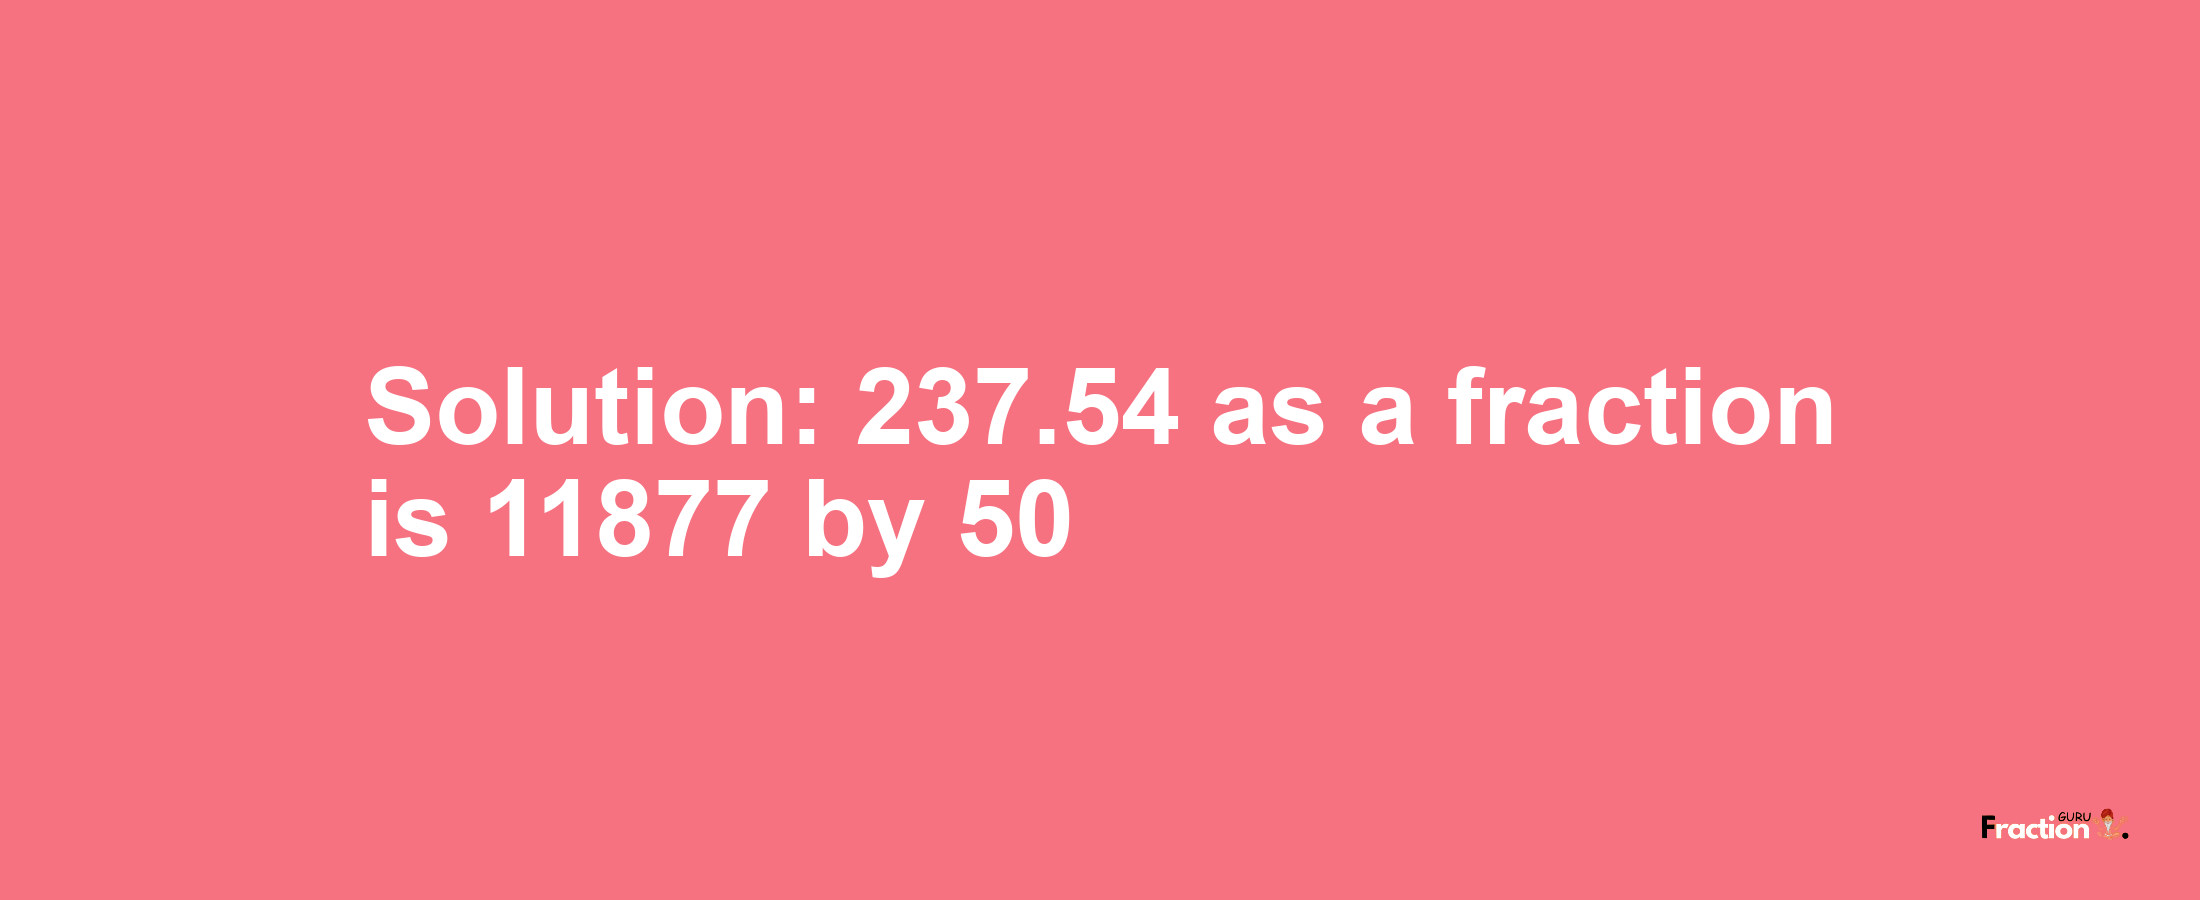 Solution:237.54 as a fraction is 11877/50